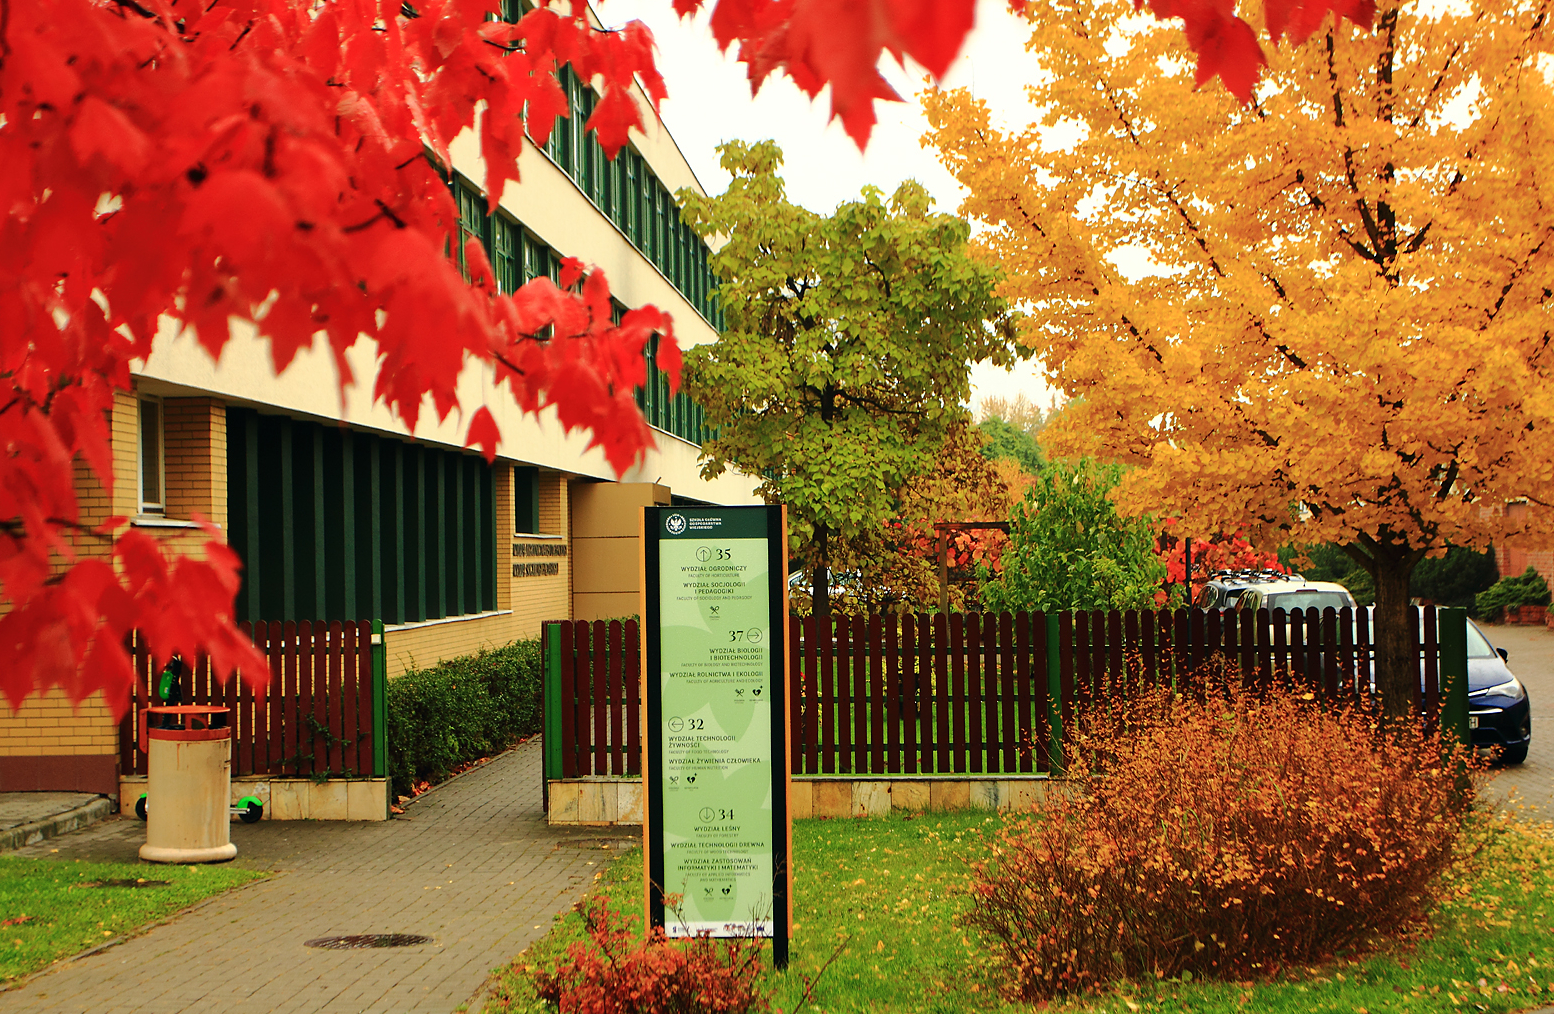 building 35 in the autumn